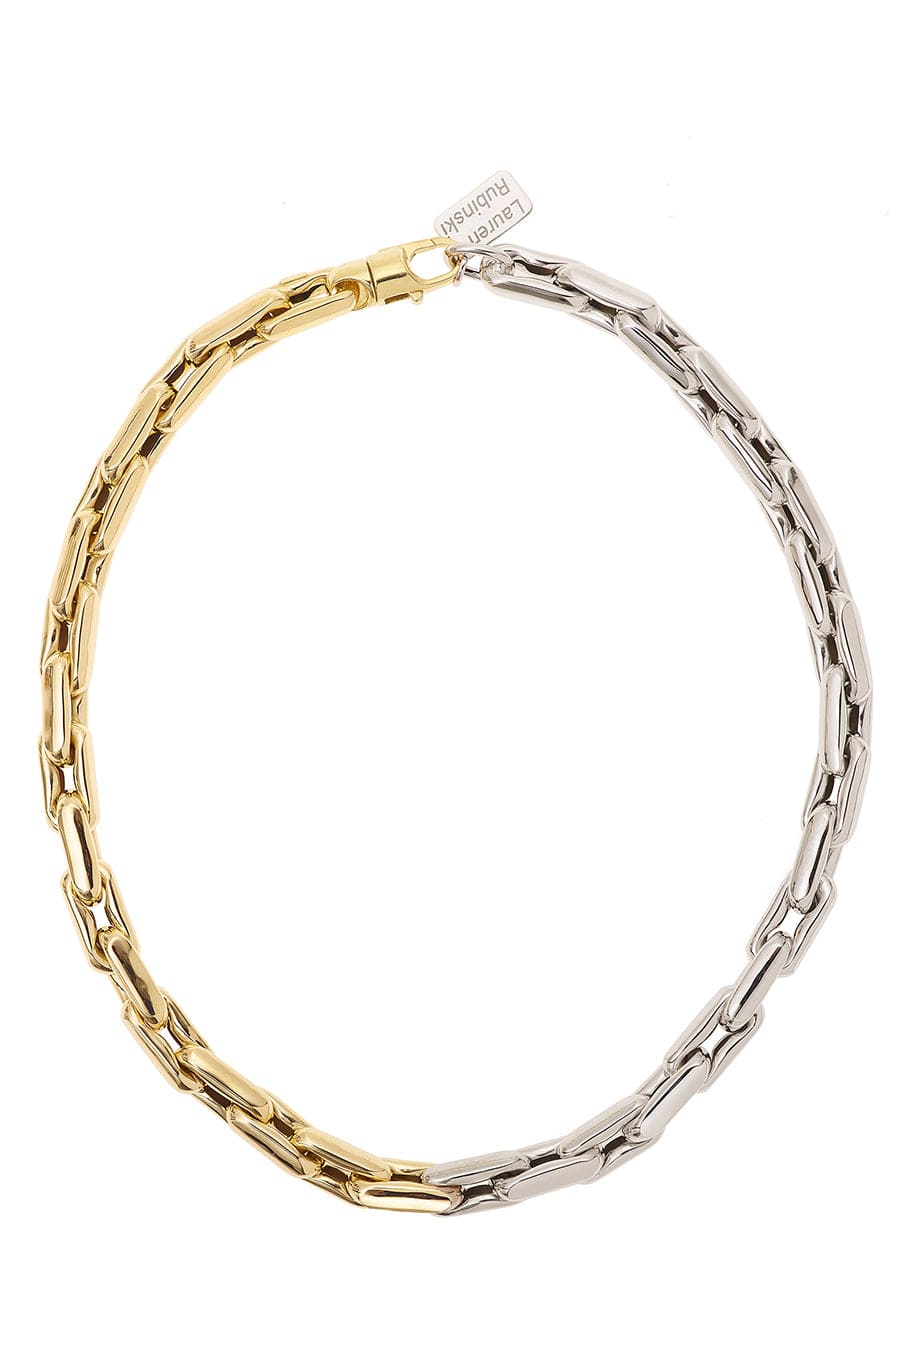 LAUREN RUBINSKI-LR3 - Small Yellow and White Gold Necklace-YELLOW GOLD